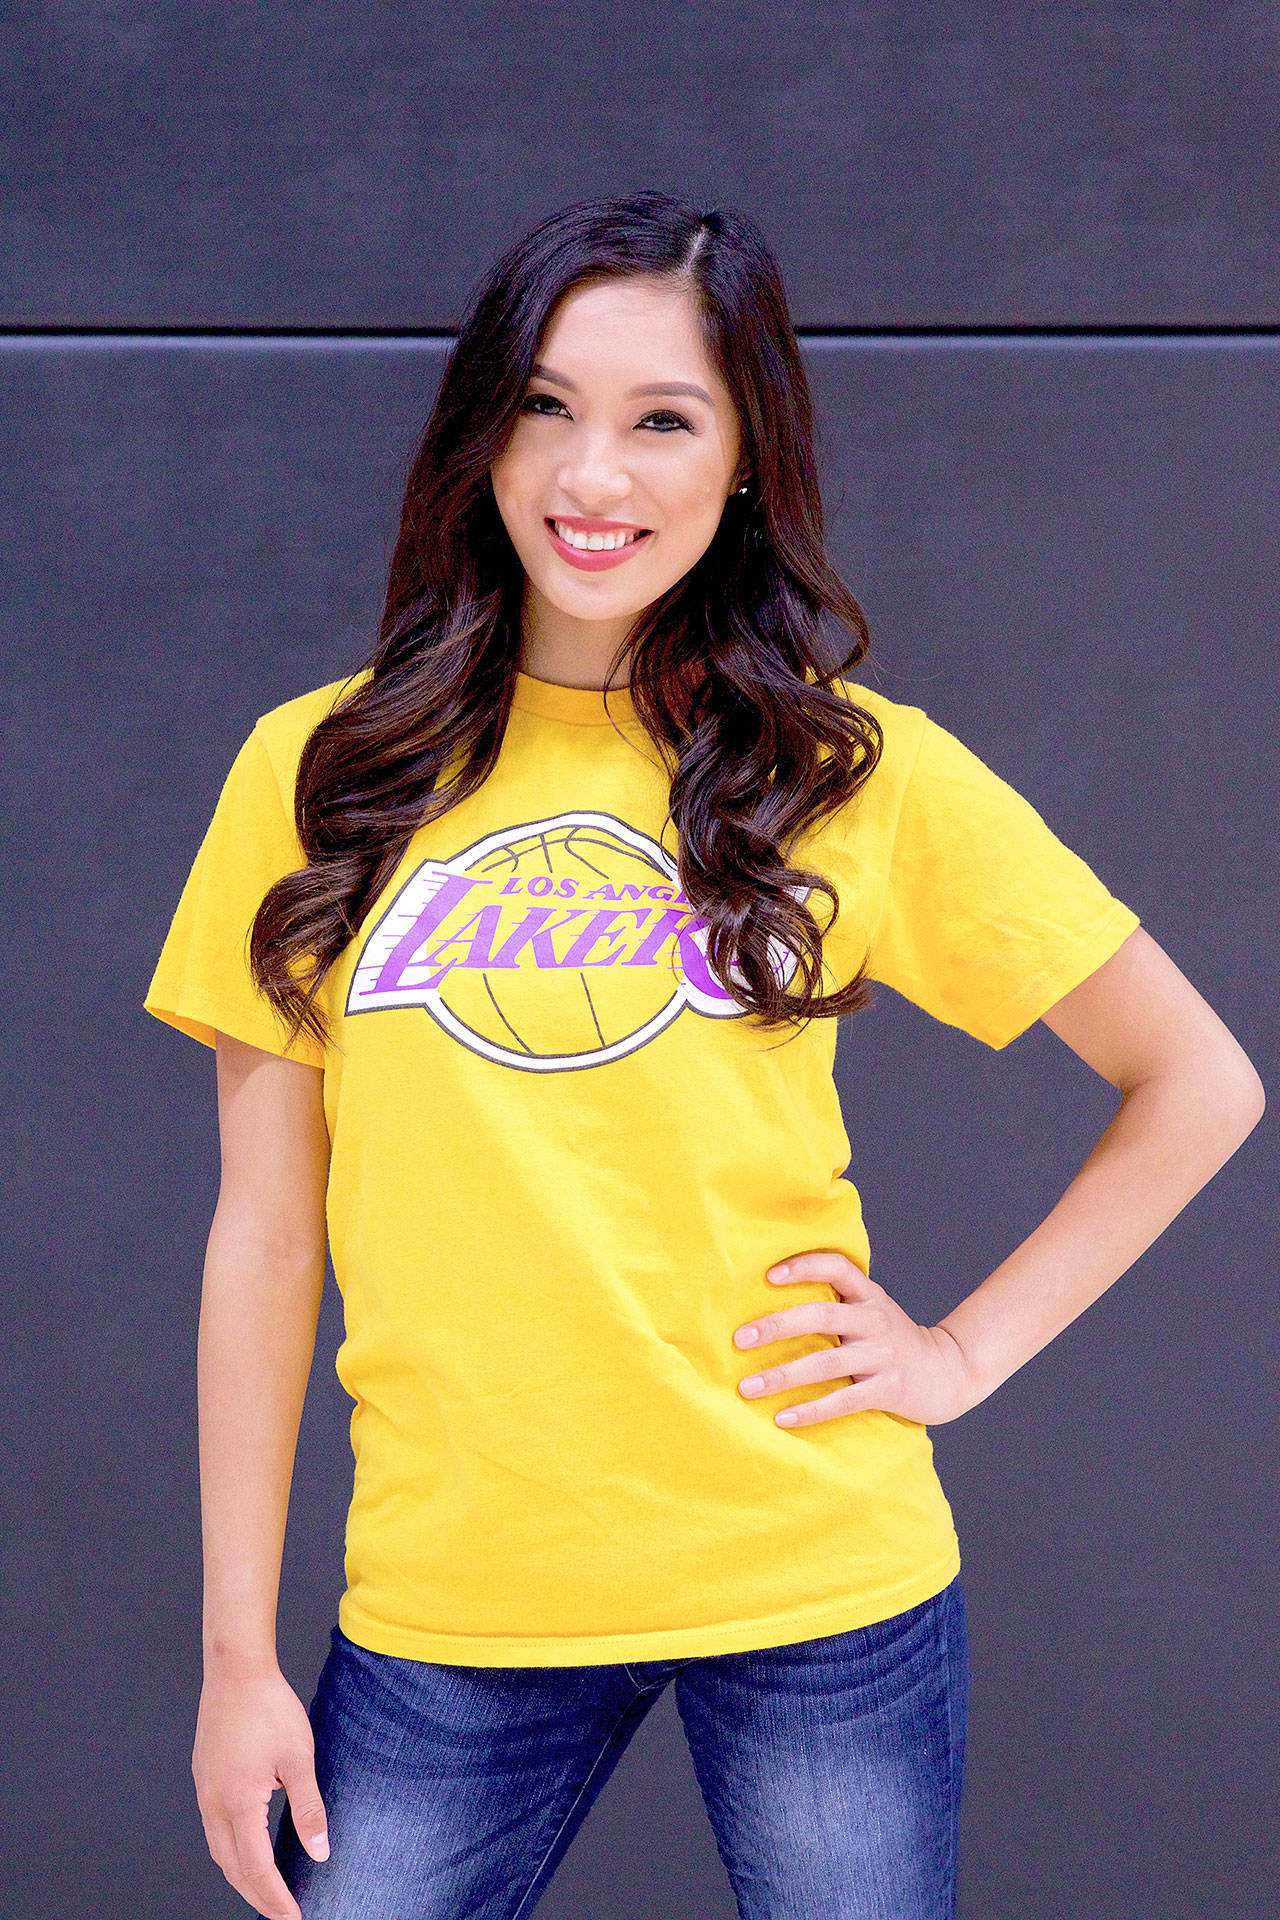 Kayla Umagat, a 2014 Kentwood graduate, spent two seasons as a Sea Gal. She joined the Laker Girls dance team for the upcoming season. COURTESY PHOTO